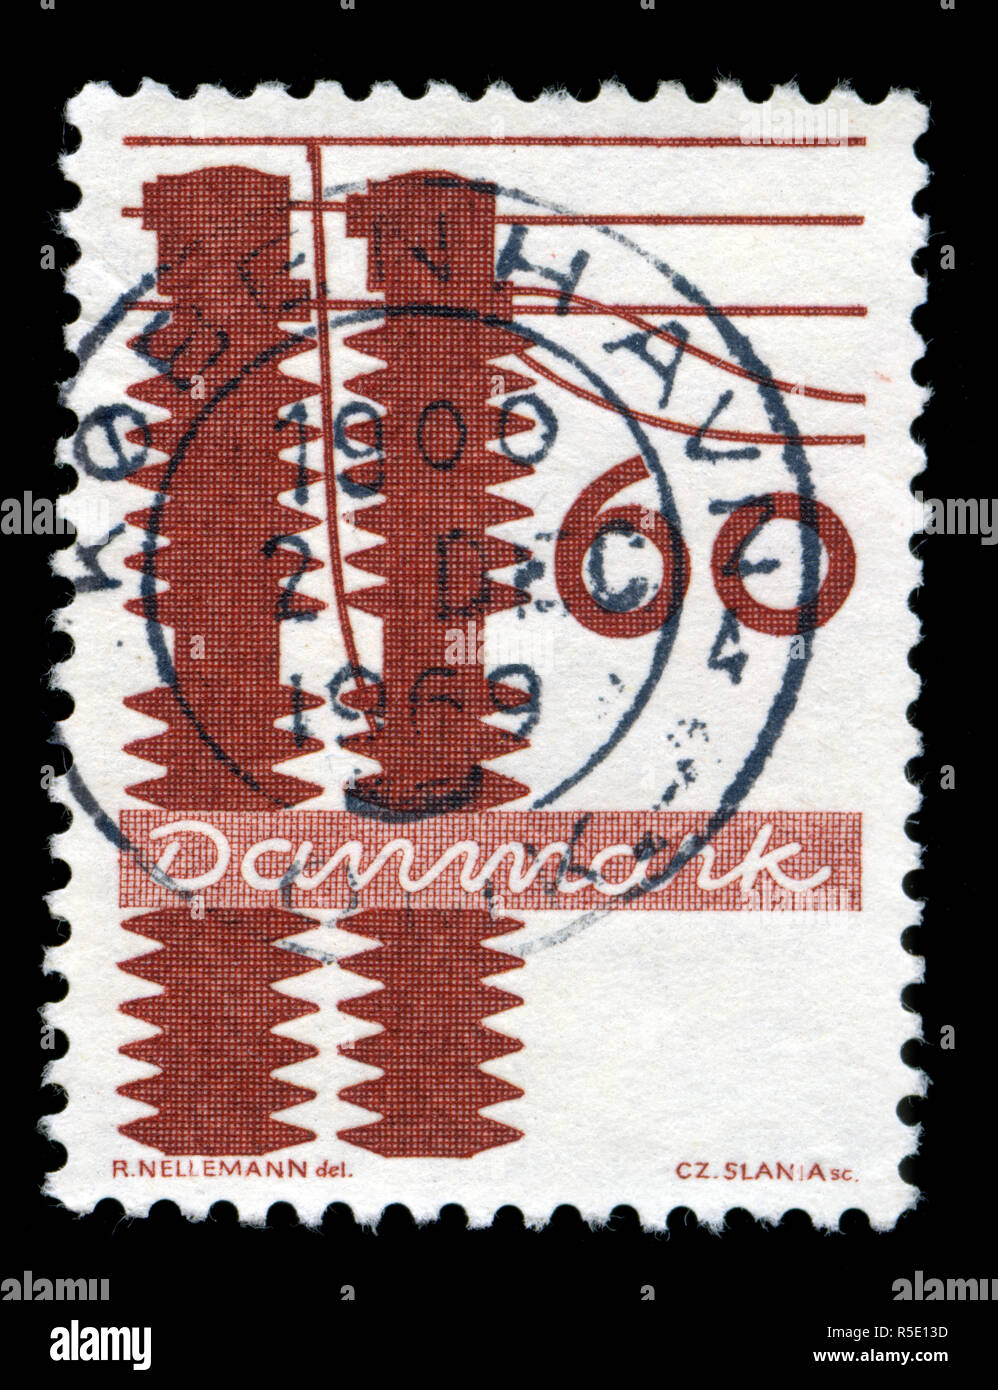 Postage stamp from Denmark in the Danish Industries series issued in 1968 Stock Photo